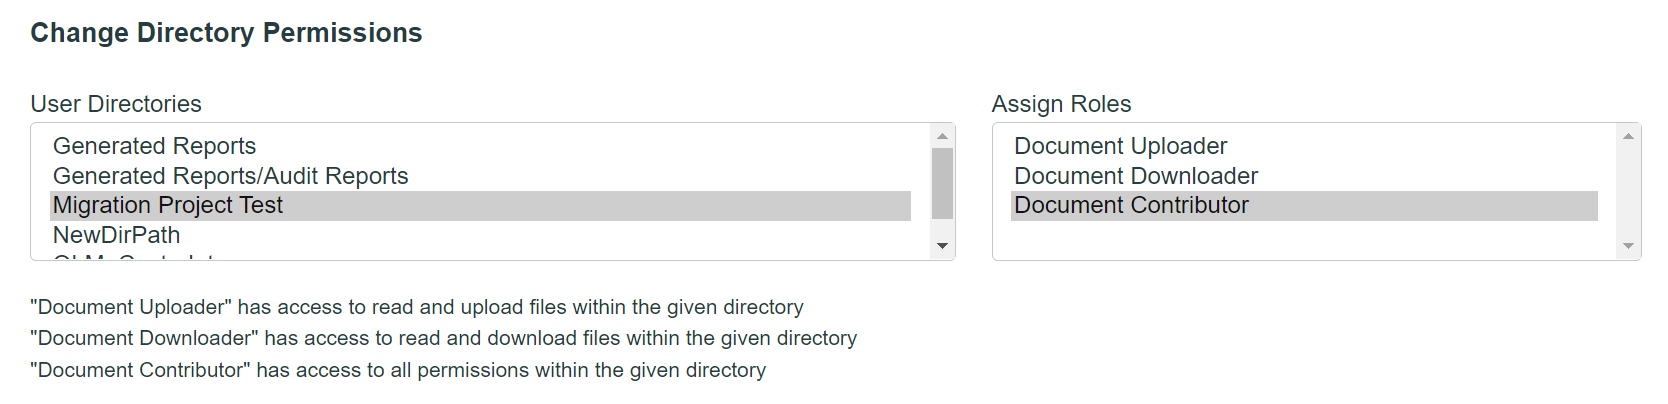 Image of change directory permissions